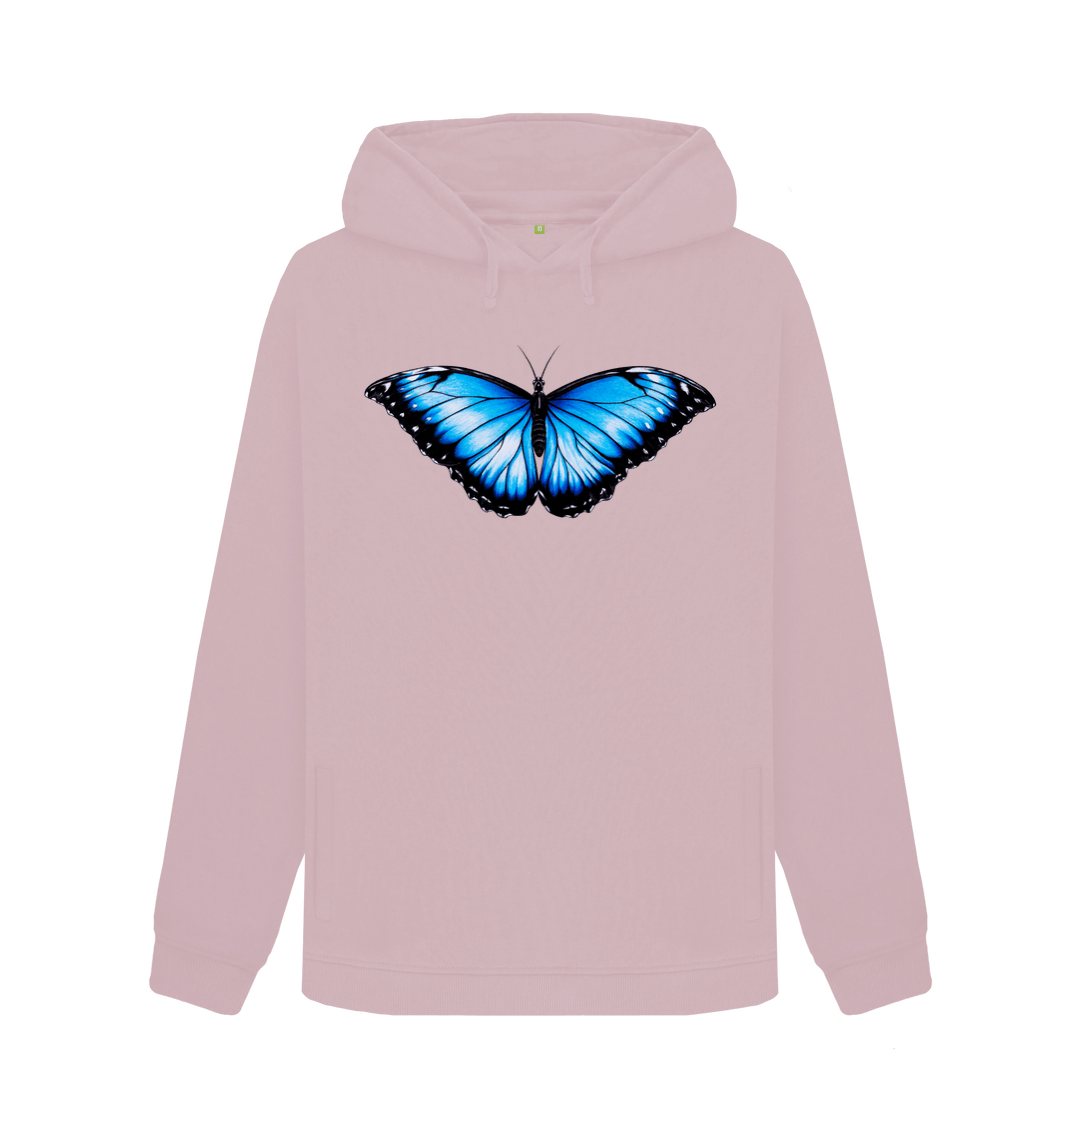 Positivity is Powerful Butterfly and Floral Print Hoodie – The